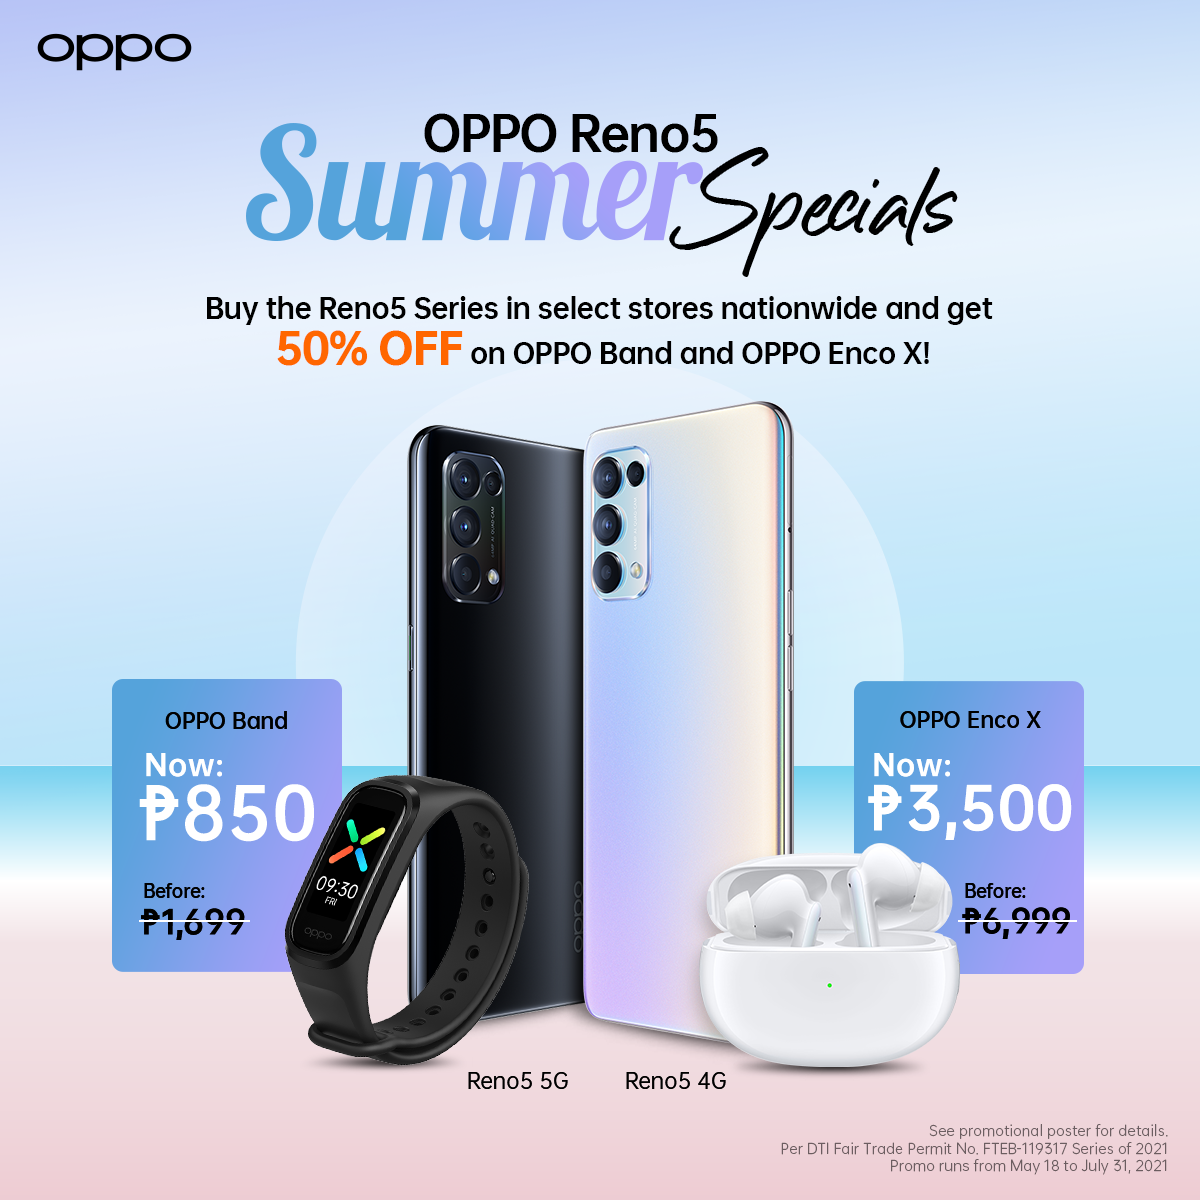 Hotter Deals with OPPO Reno5 Series offering 50% off on OPPO Enco X and OPPO Band